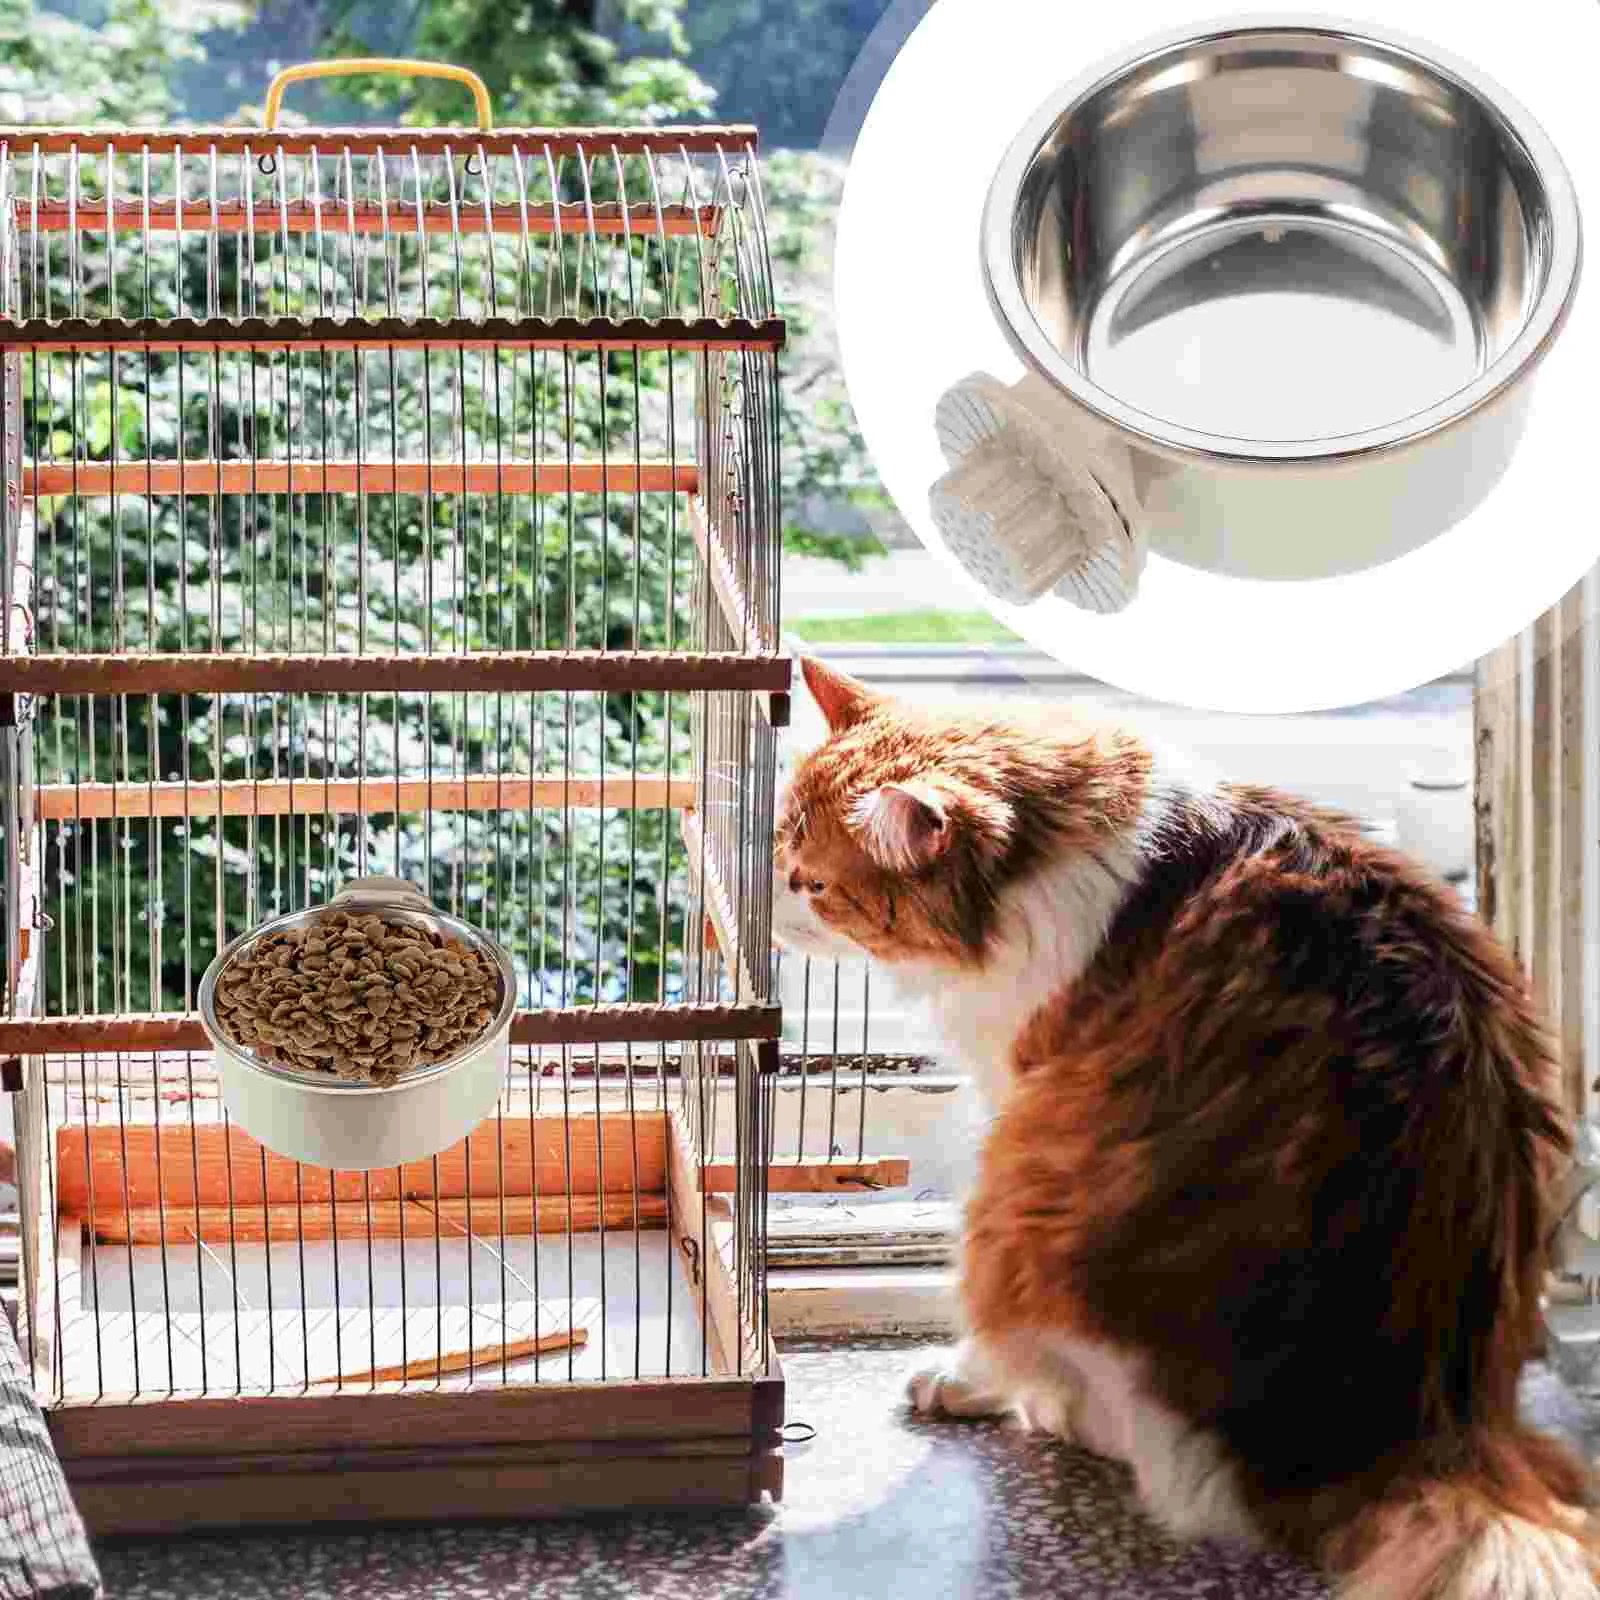 

Bowl Dog Bowls Water Food Pet Feeder Crate Dogs Hamster Dish Cat Stainless Steel Rabbit Supplies Kennel Guinea Puppy Spill